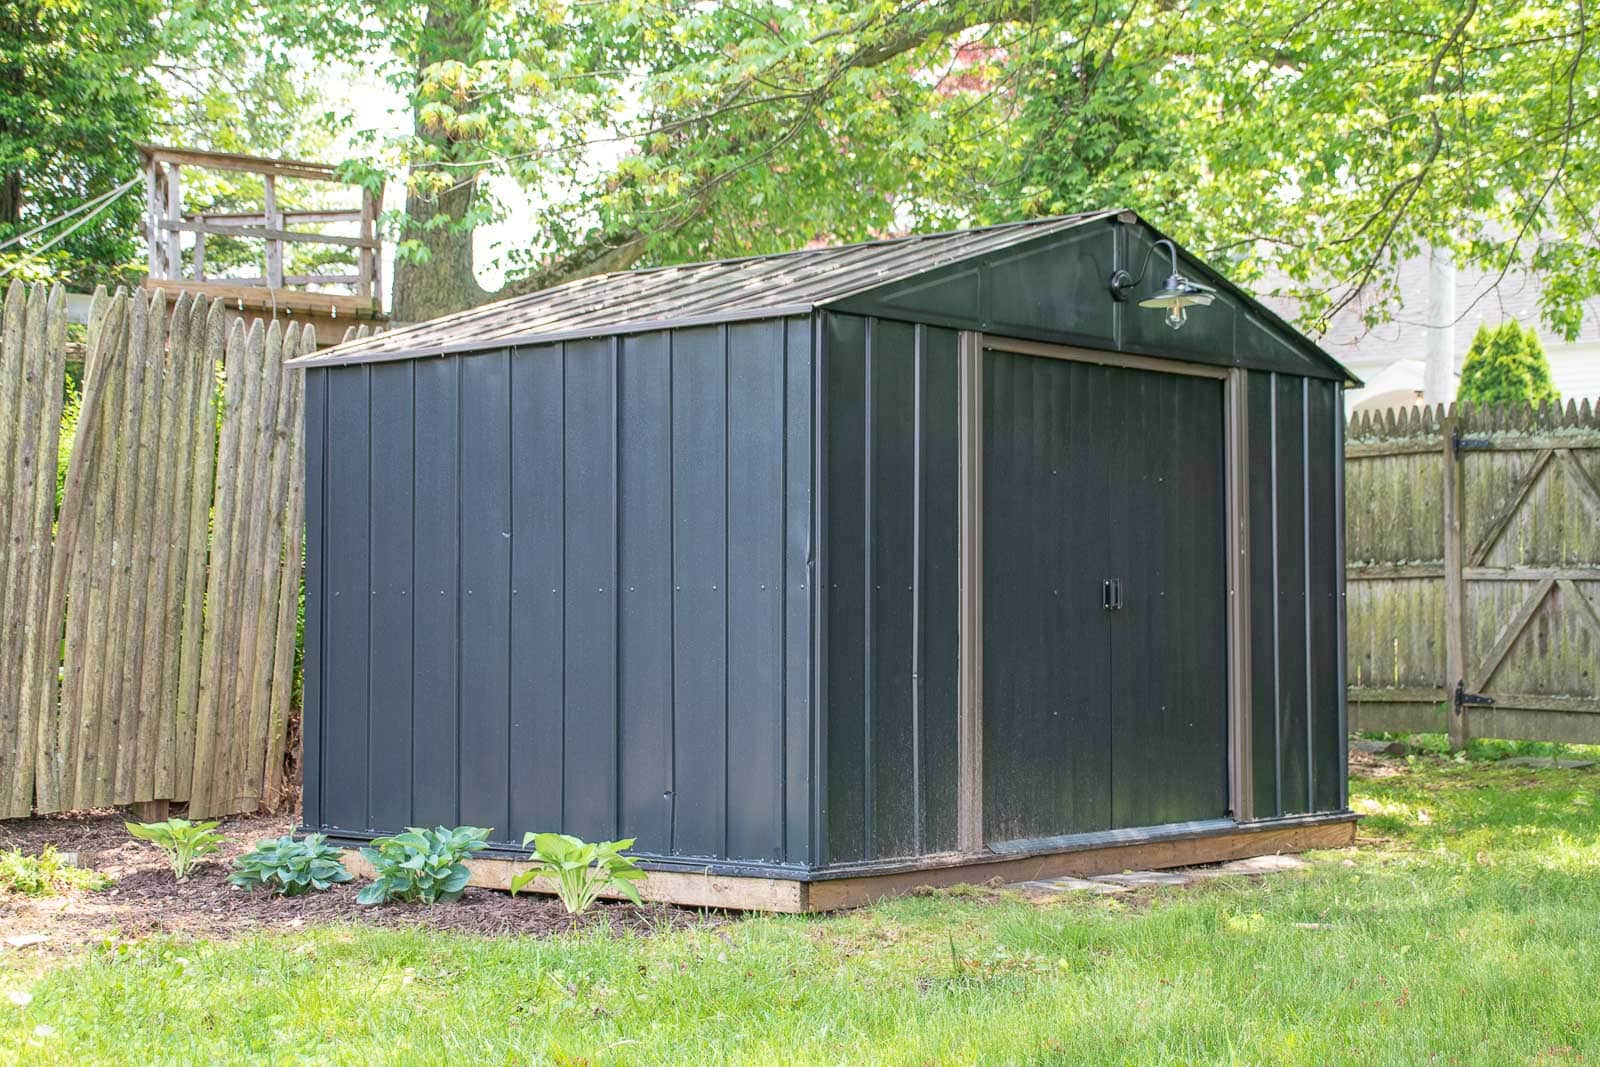 How To Paint An Outdoor Shed